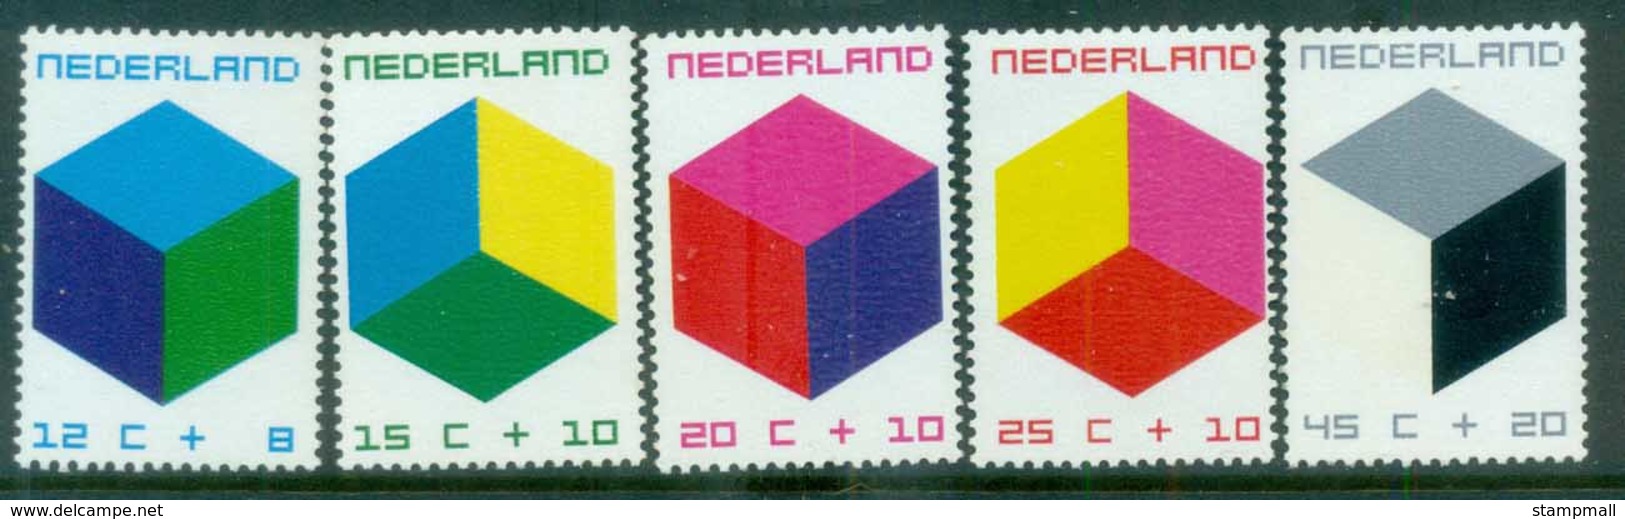 Netherlands 1970 Charity, Child Welfare, Cubes MUH Lot76560 - Unclassified